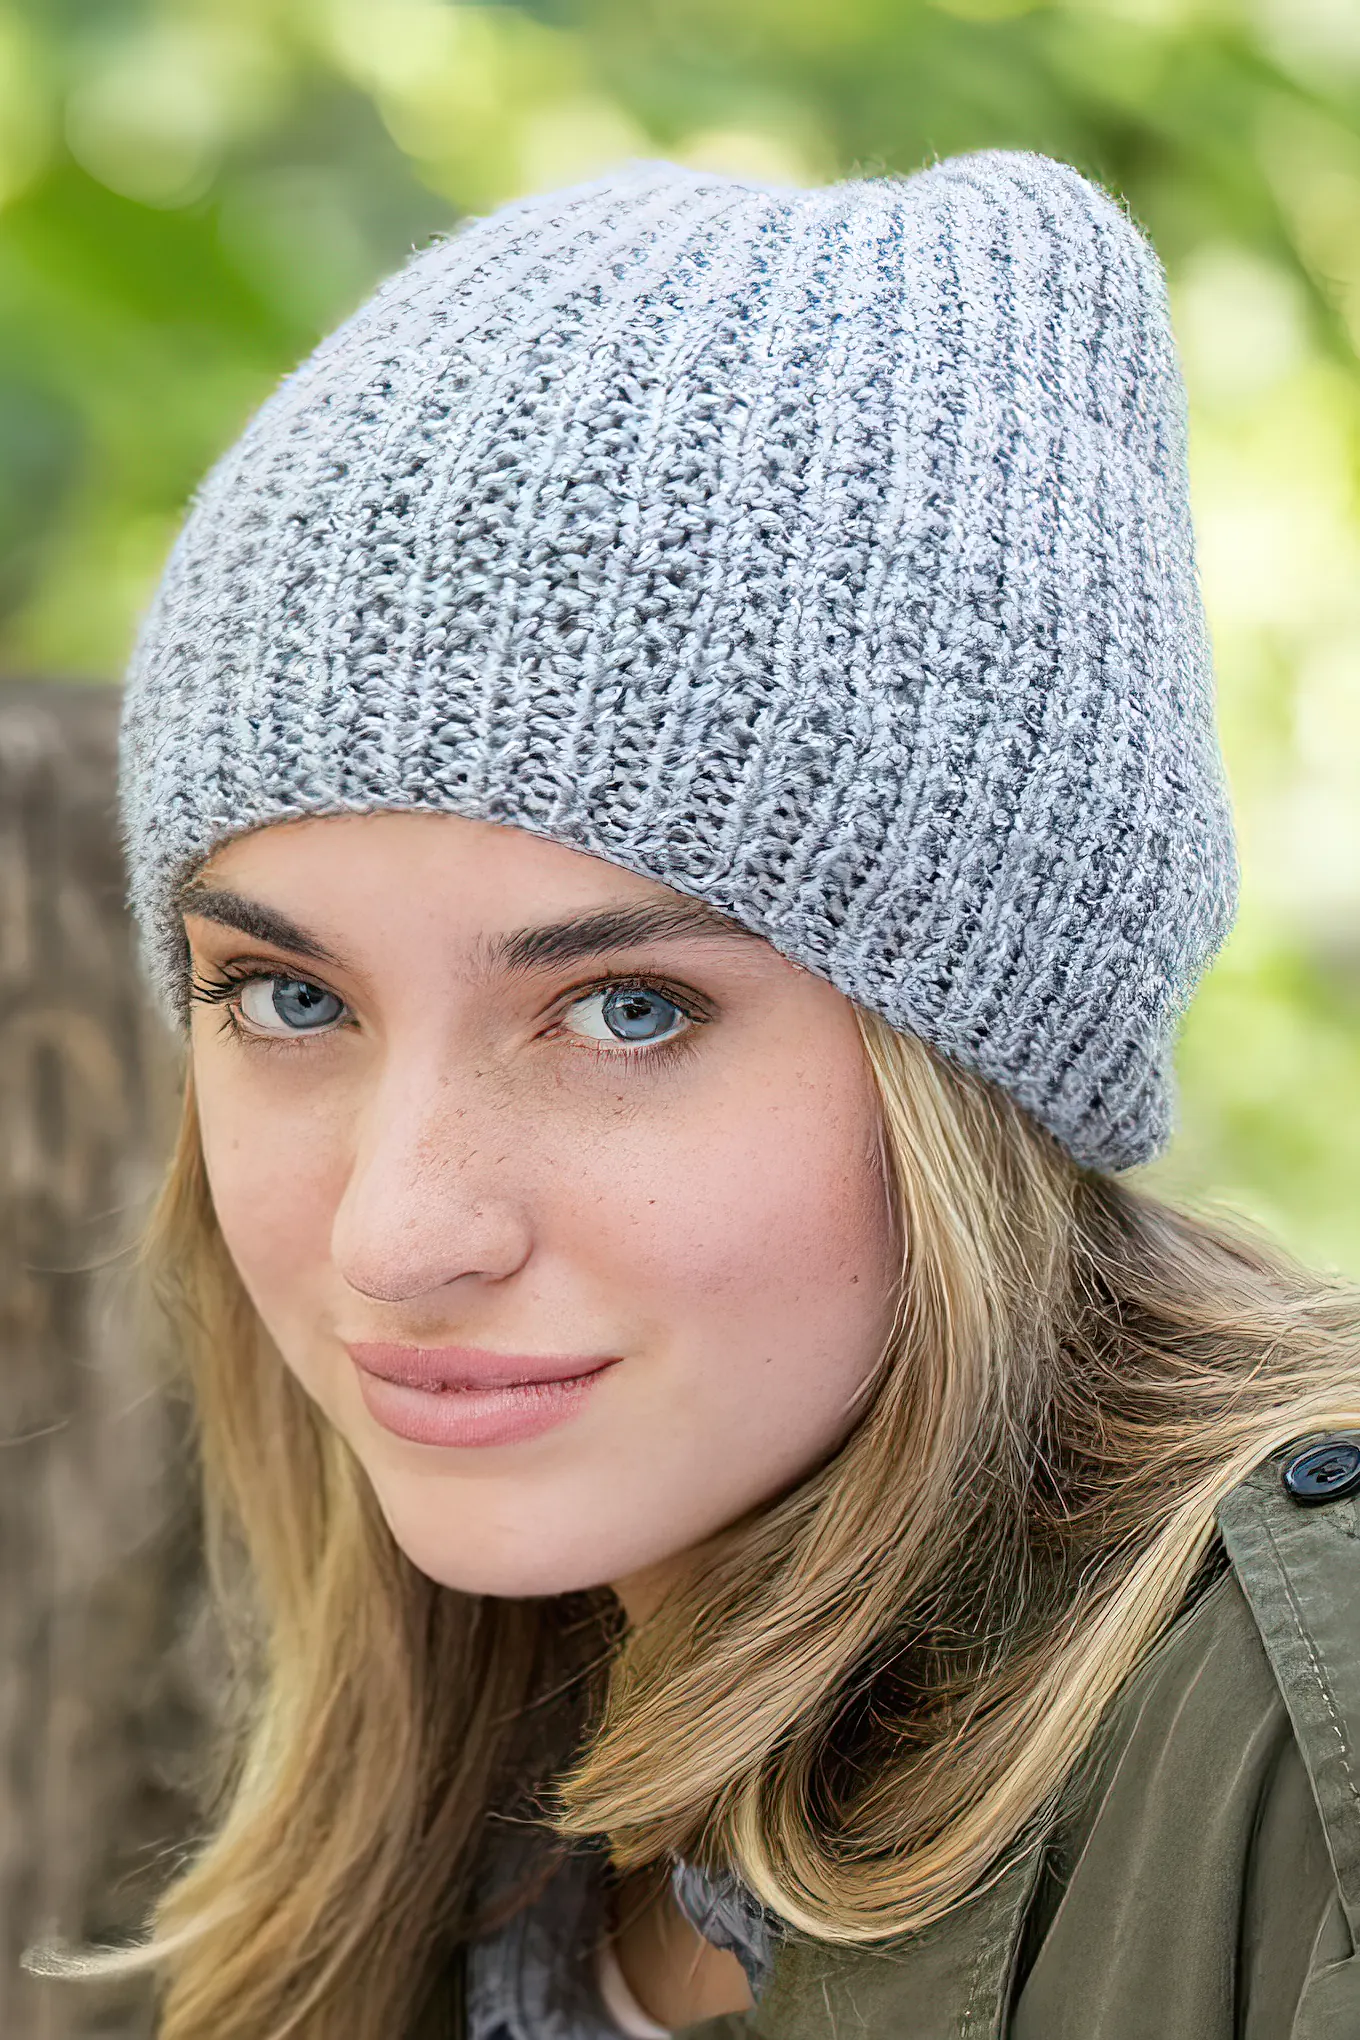 Woman with blonde hair wearing gray knit beanie